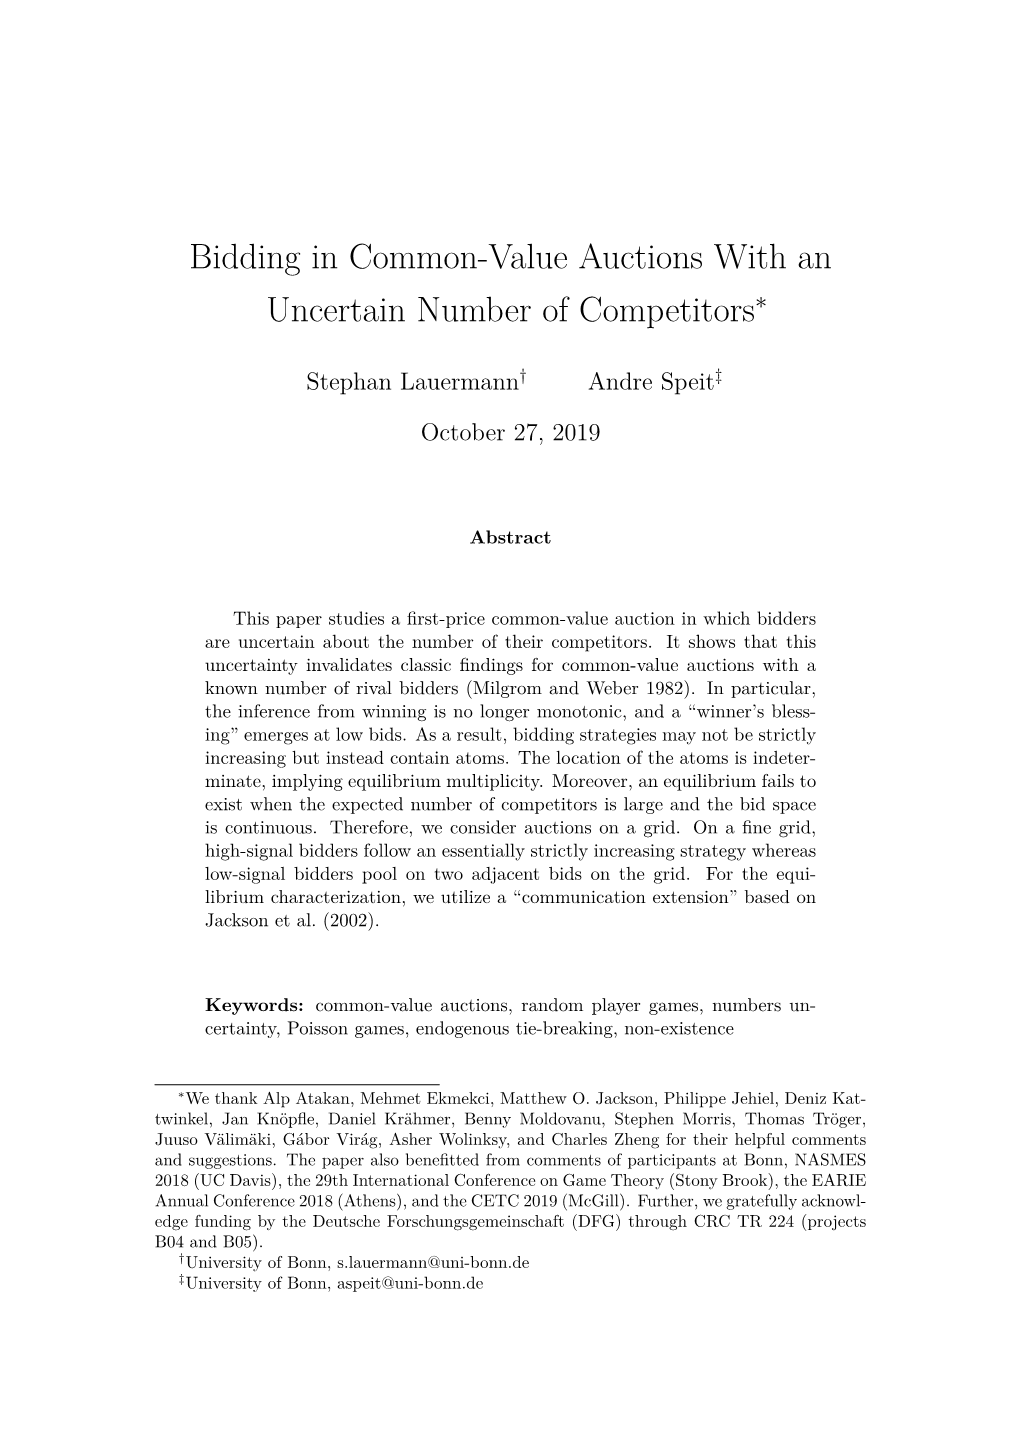 Bidding in Common-Value Auctions with an Uncertain Number of Competitors∗